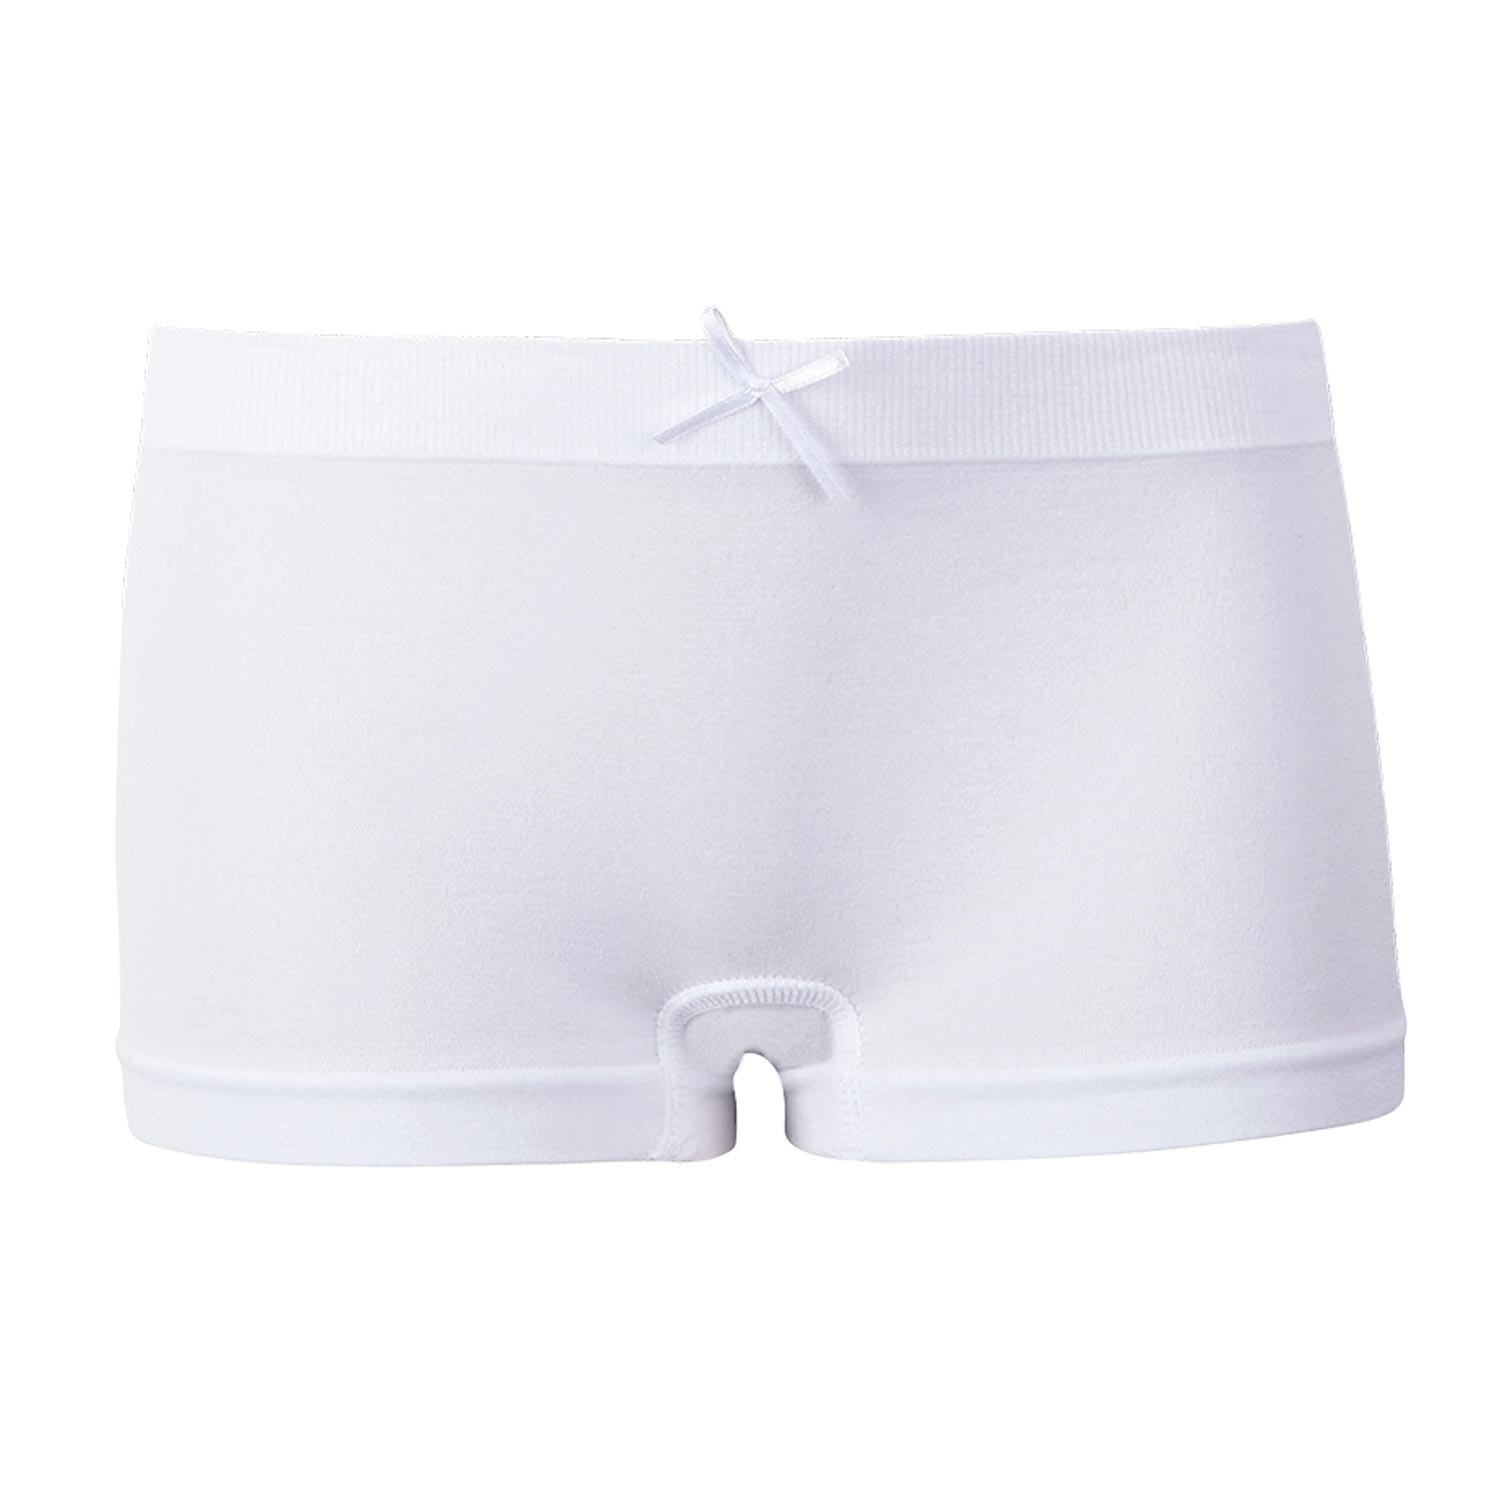 12 Pack Girl 'S Seamless Panty